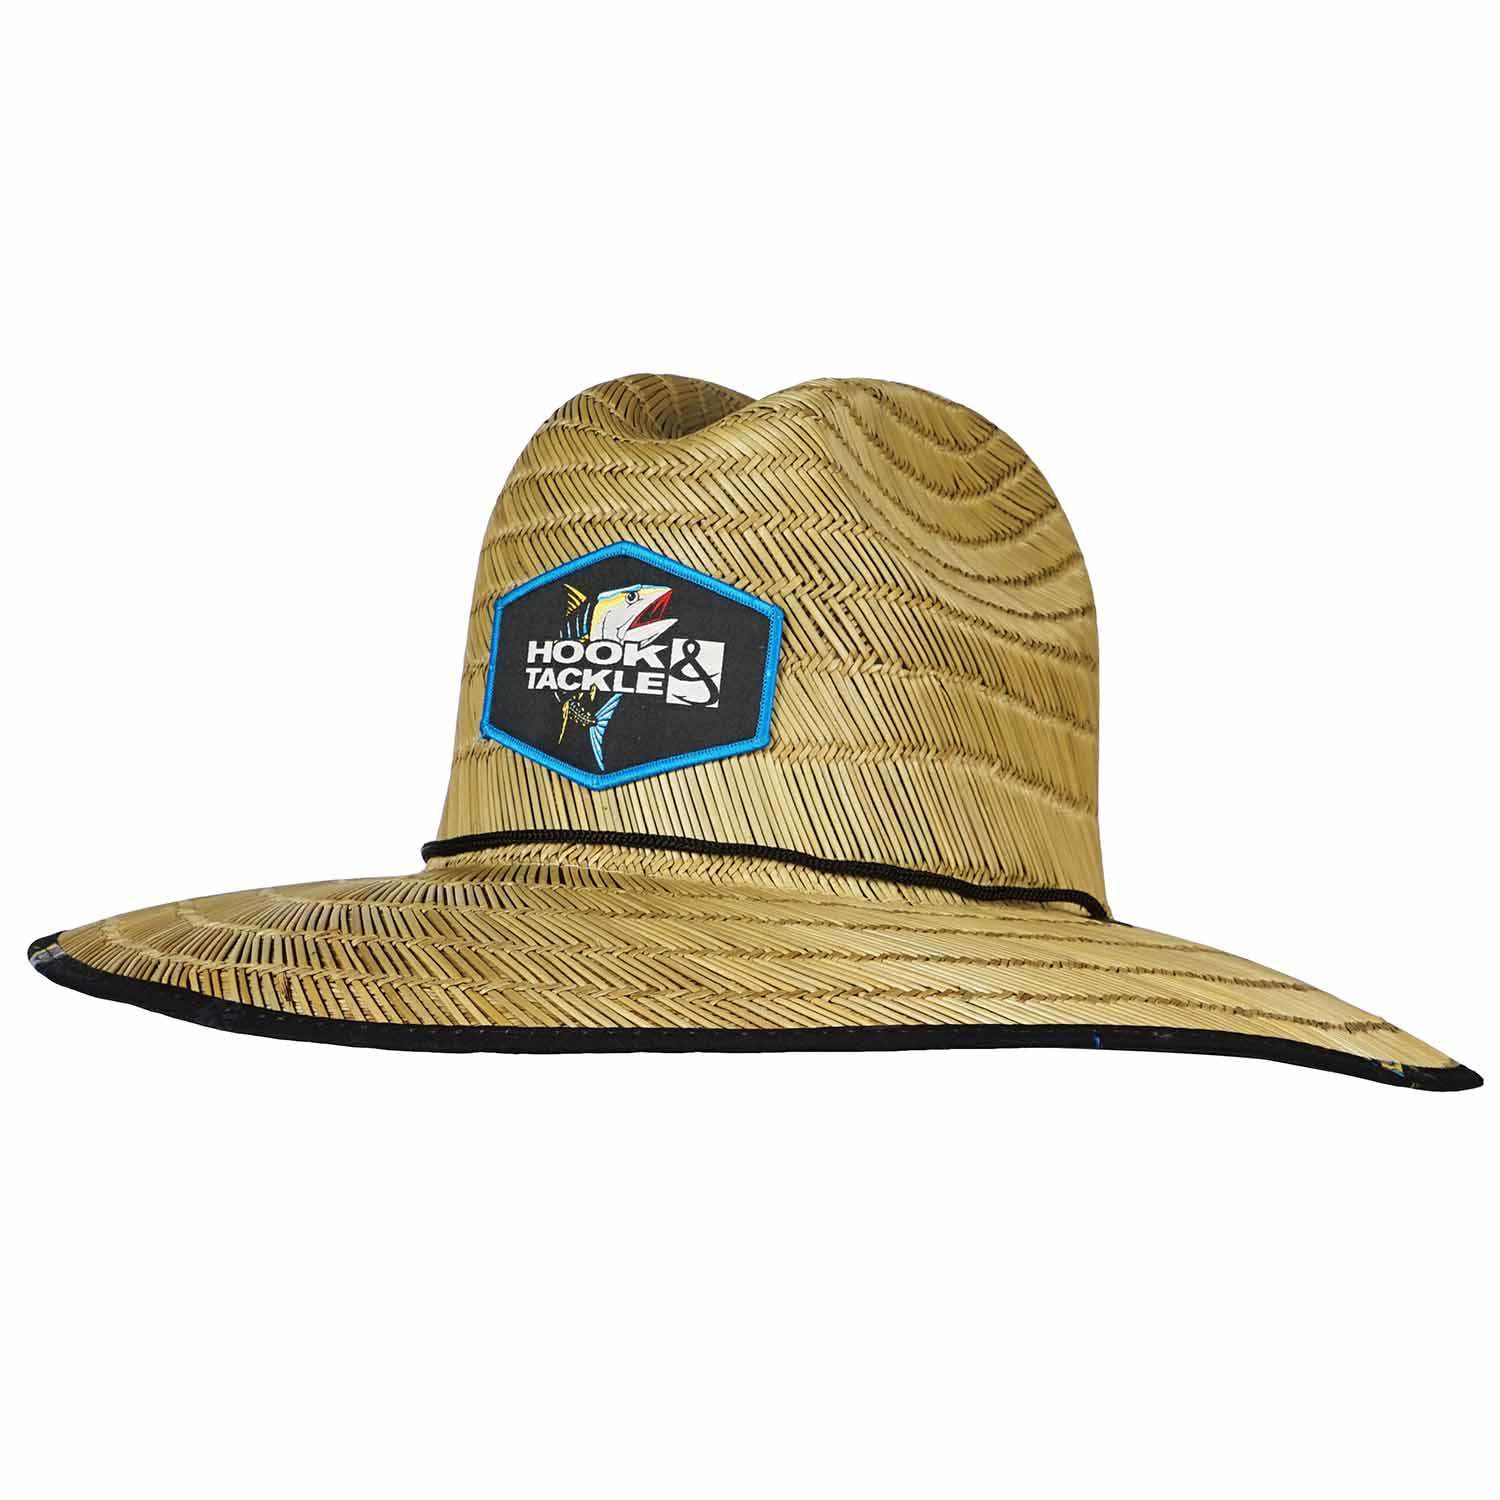 Hook & Tackle American Lifeguard | Fishing Stretch Fit | Straw Hat